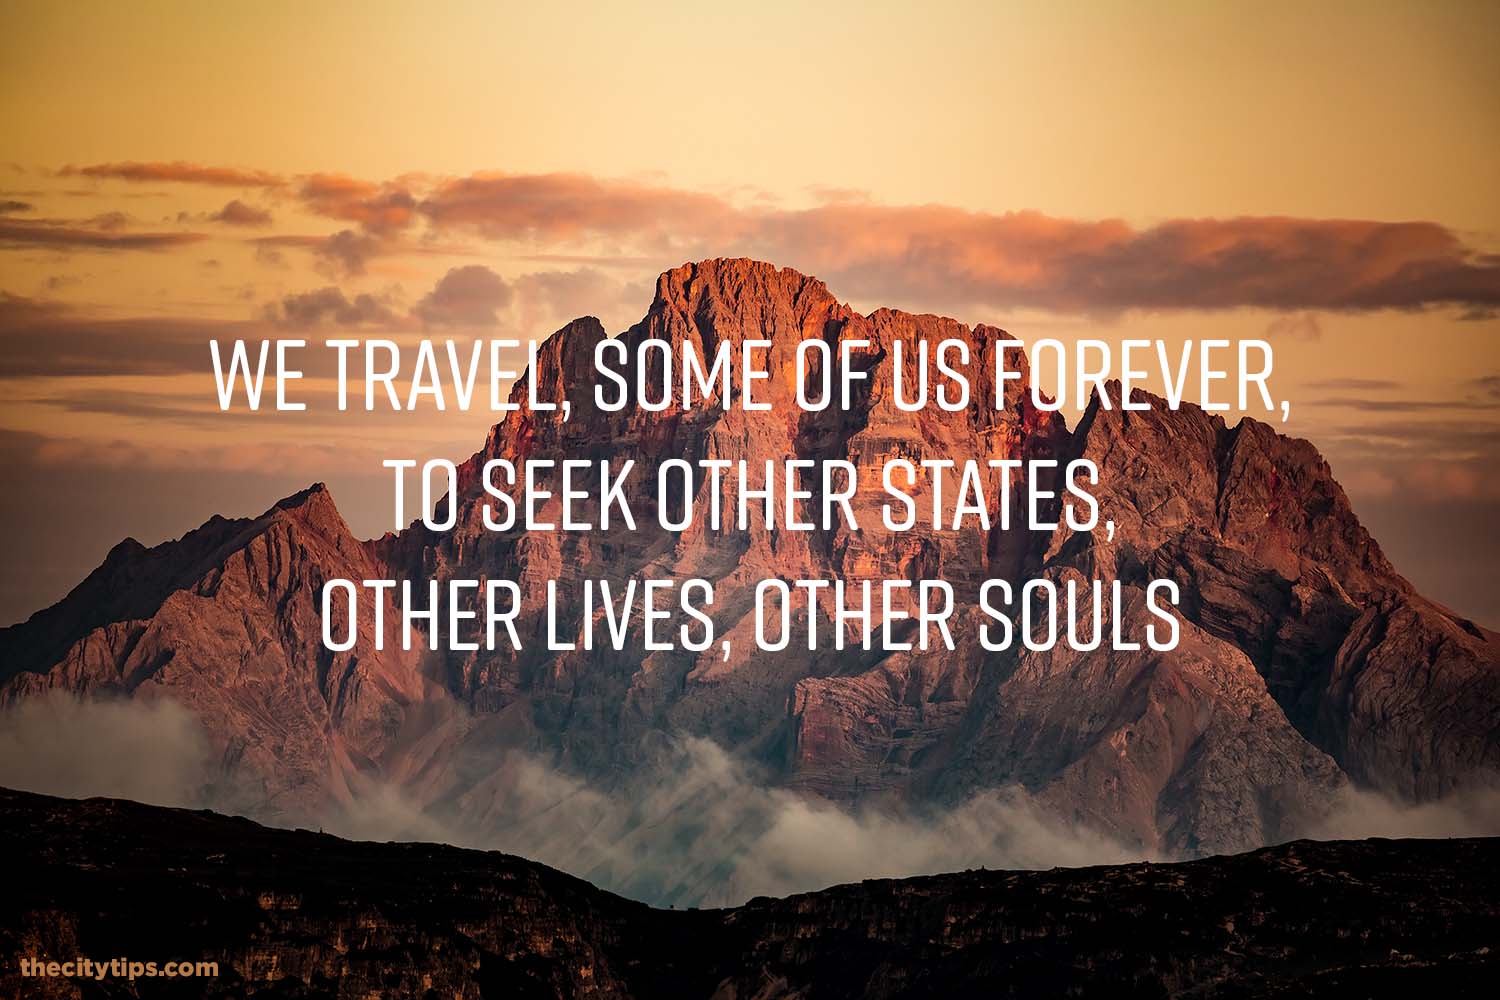 "We travel, some of us forever, to seek other states, other lives, other souls." by Anaïs Nin